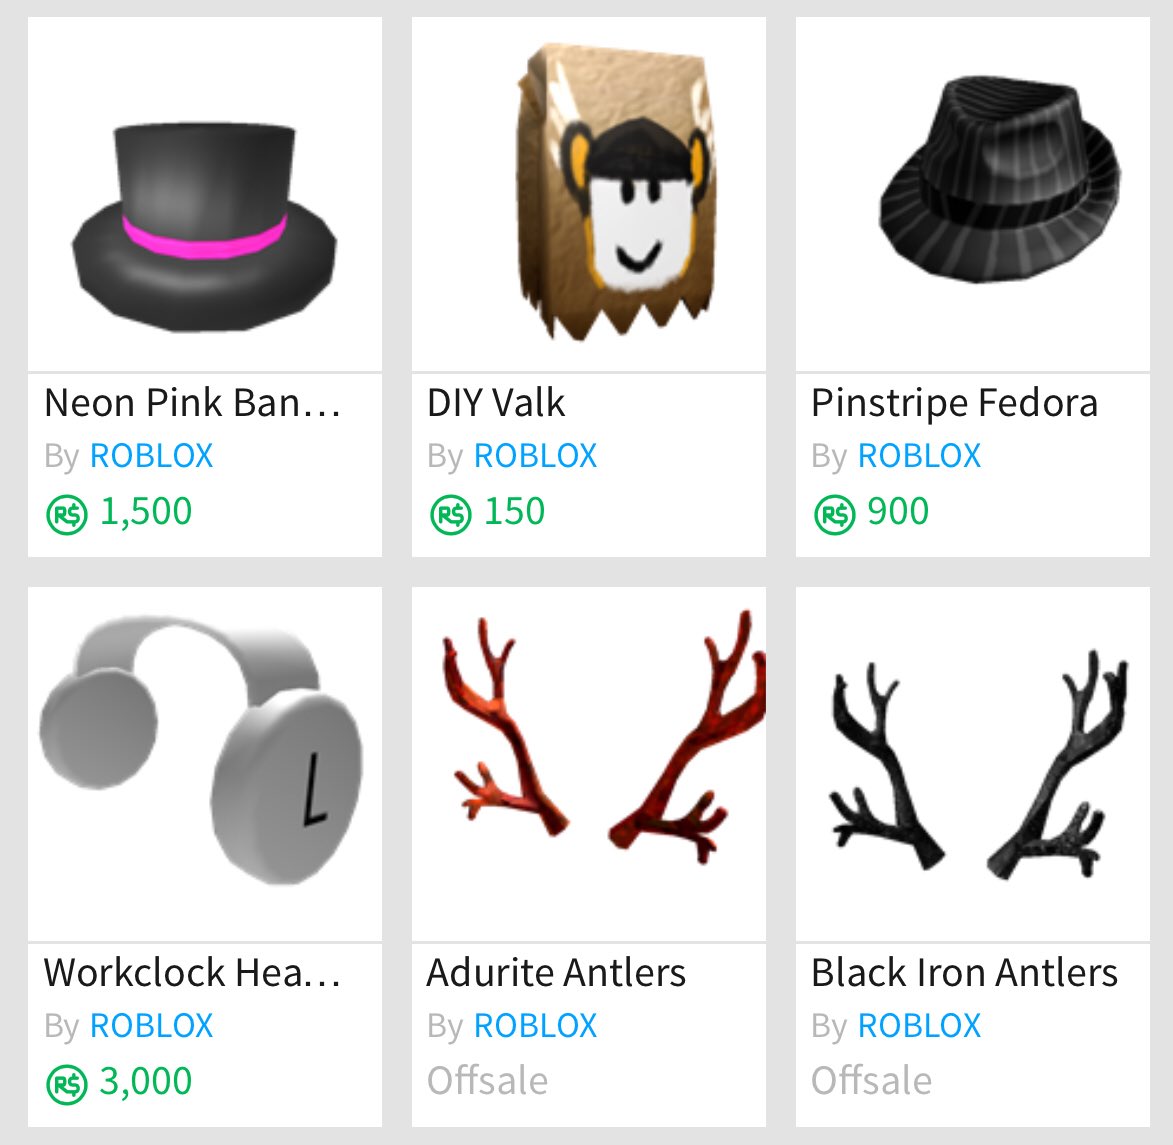 Bloxy News On Twitter Bloxynews The Roblox Labordaysale Is Now Officially Over What Items Did You Get This Sale Let Me Know In The Replies Https T Co Mlauz4nitc - roblox pinstripe fedora